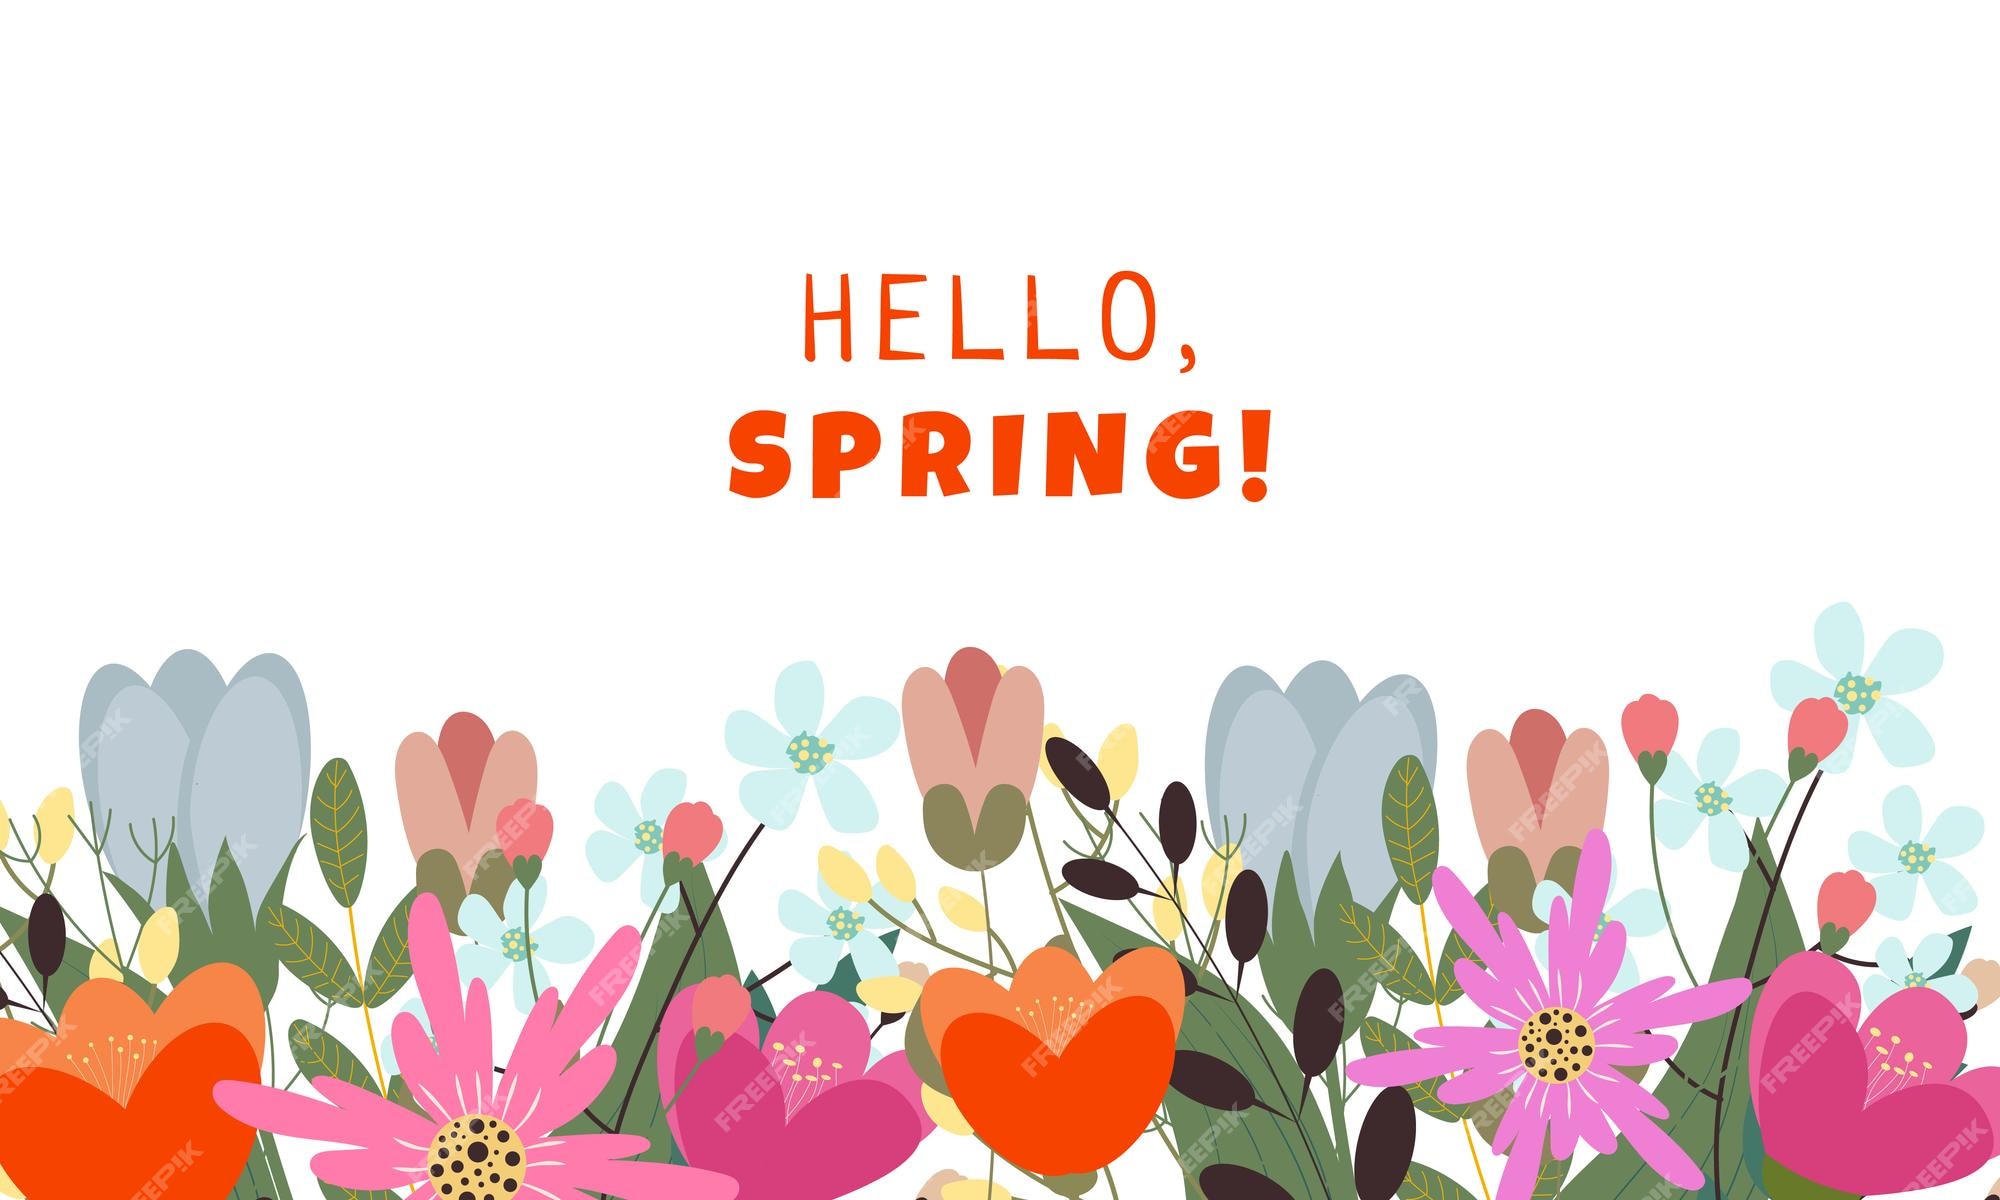 hello-spring-banner-season-vocation-weekend-holiday-logo-spring-time-wallpaper-happy-spring-day_721791-946.jpg